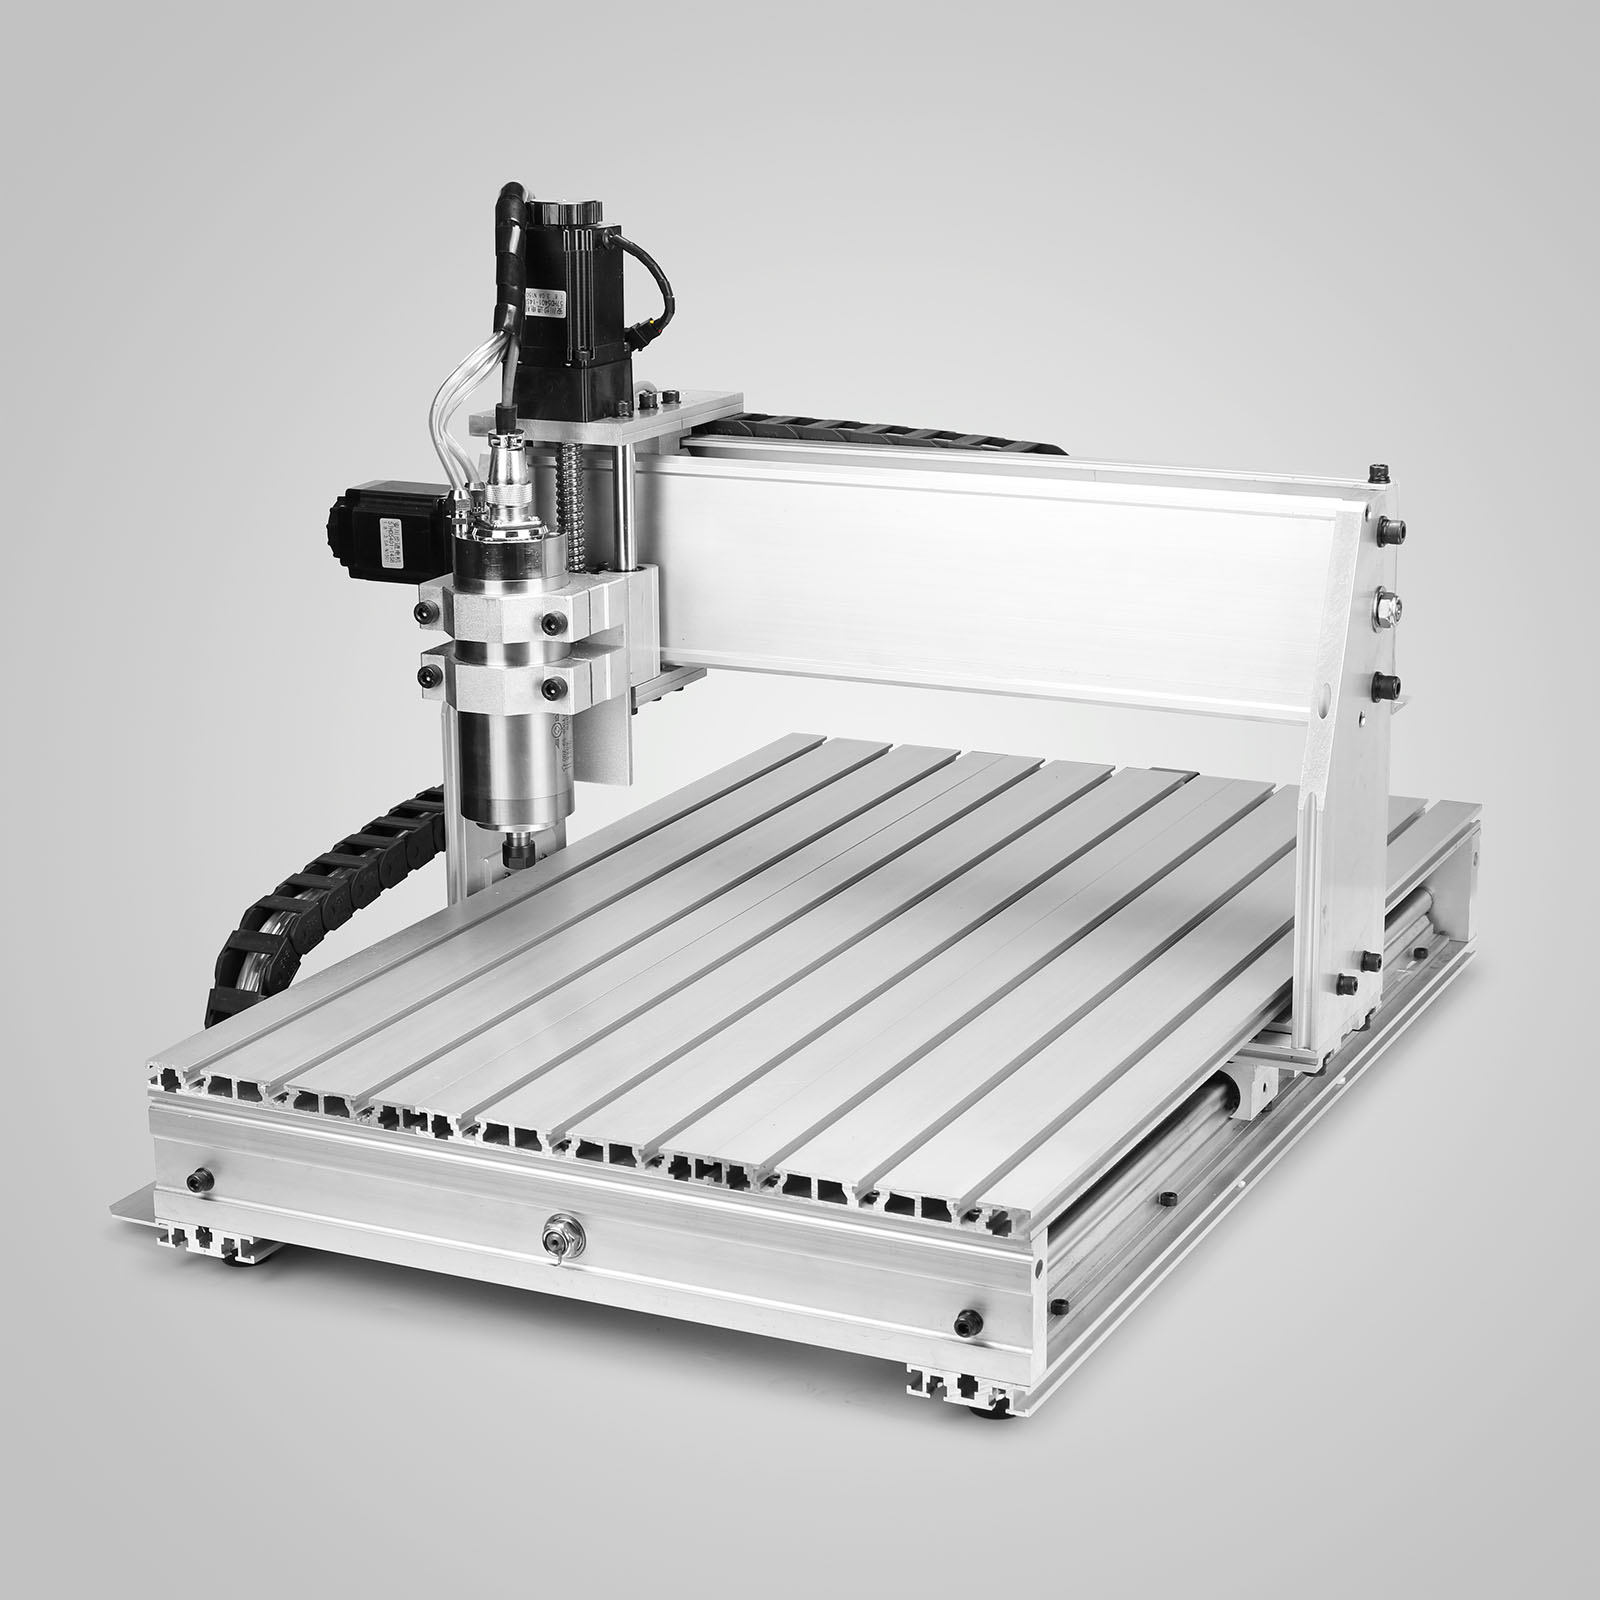 CNC-ROUTER-ENGRAVING-DRILLING-MILLING-ENGRAVER-MACHINE-6040-4-AXIS-ART ...